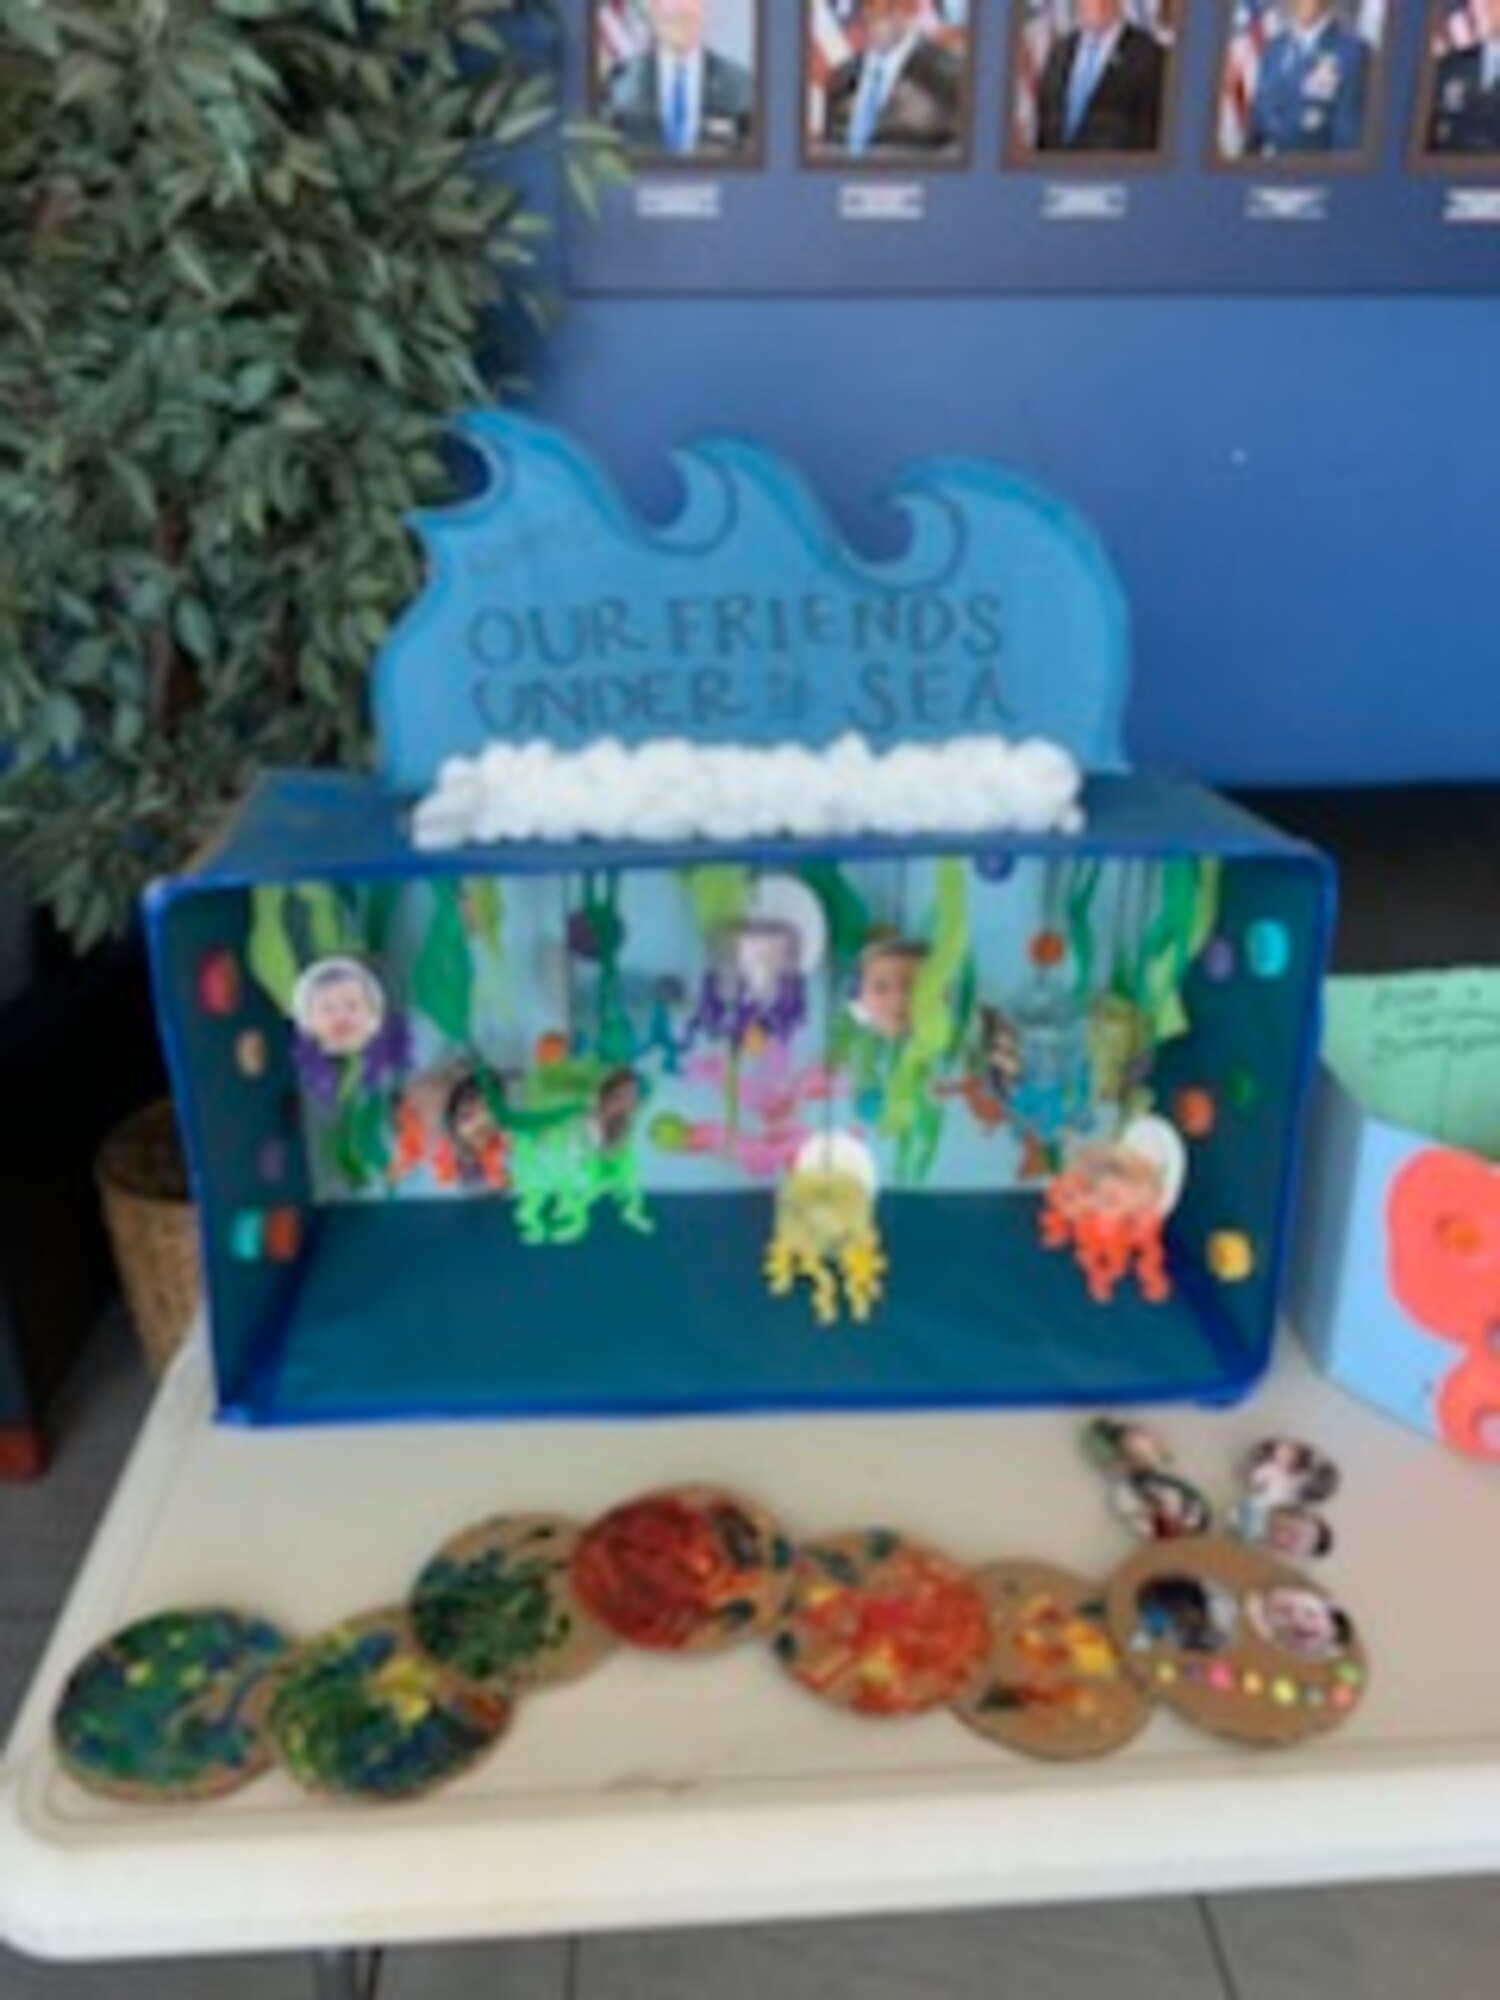 In honor of Earth Day last month, the Child Development Center and the 61st Civil Engineering and Logistics Squadron provided a fun way to develop awareness for saving the planet through building colorful and informative dioramas and planting flowers.